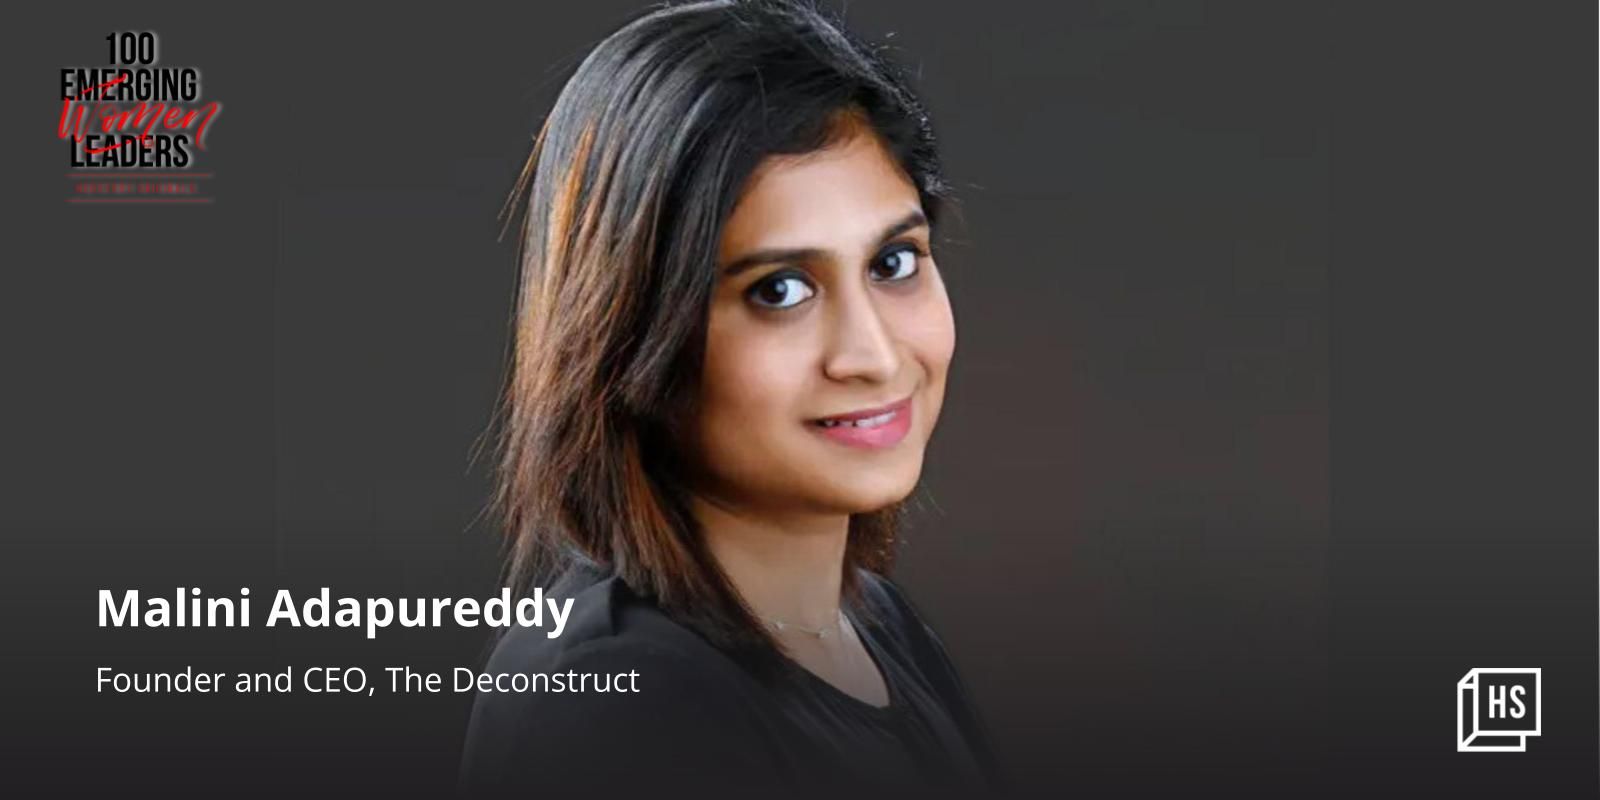 [100 Emerging Women Leaders] Malini Adapureddy is ‘Deconstruct’-ing the idea of what women can do